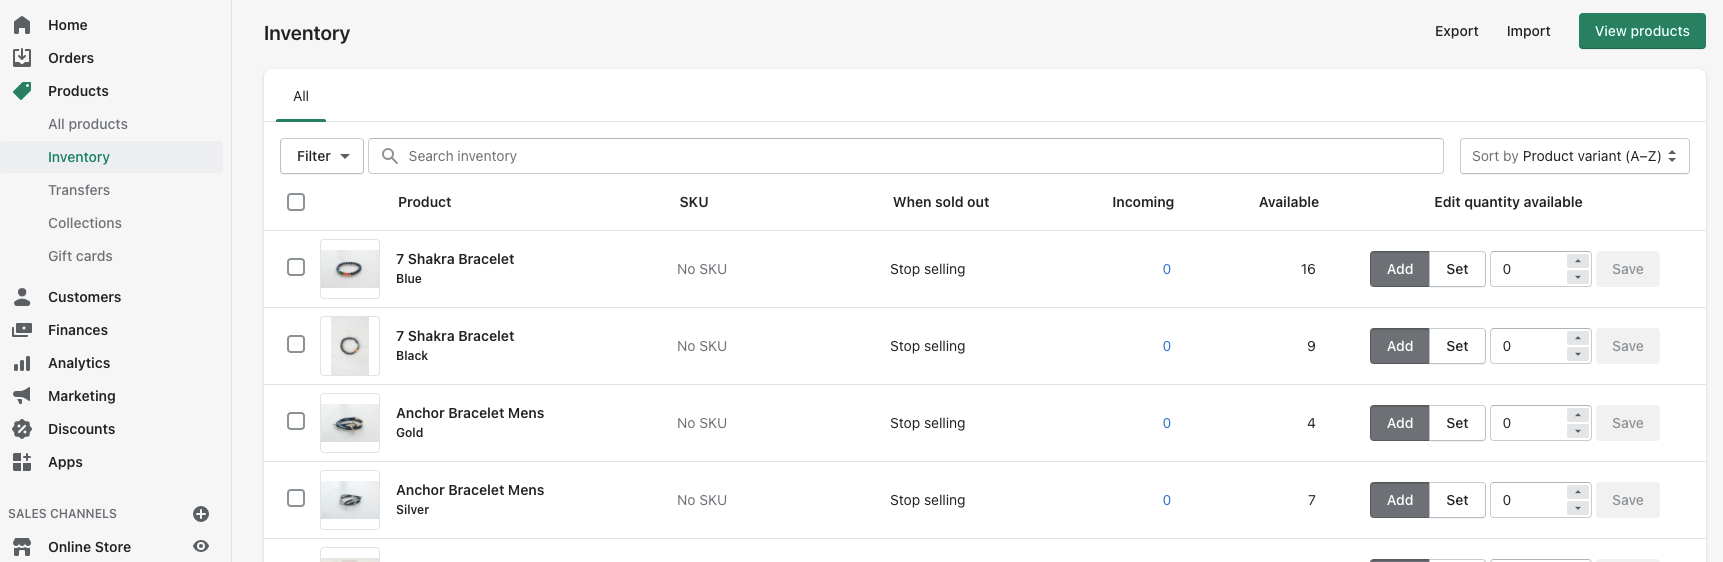 shopify inventory management dashboard